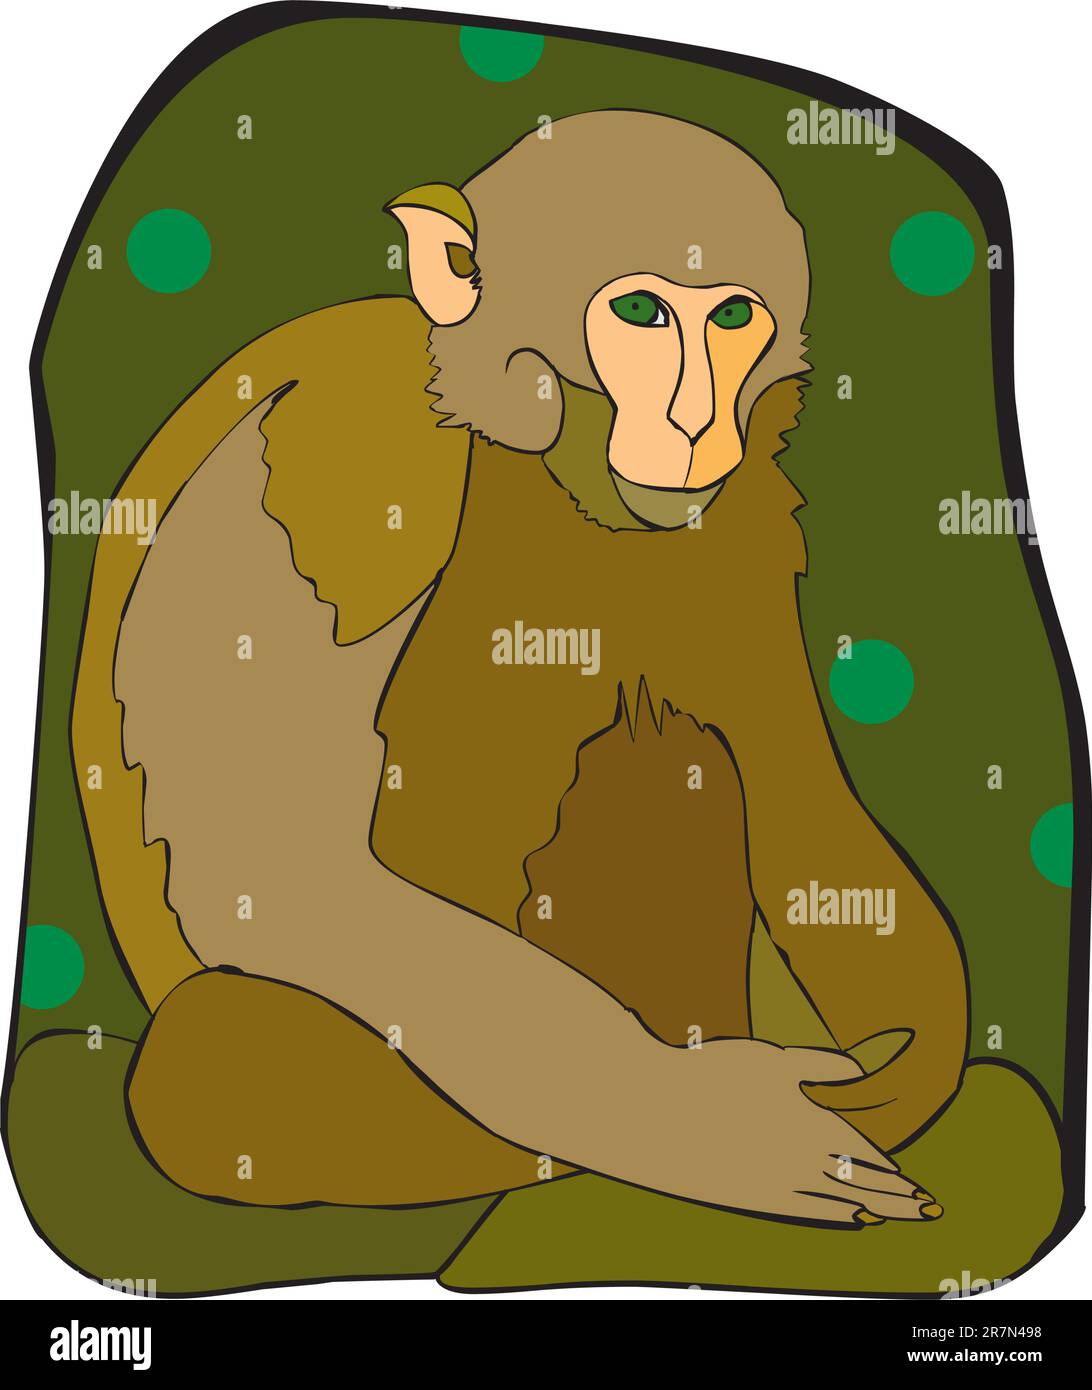 Brown sedentary monkey on a green background Stock Vector